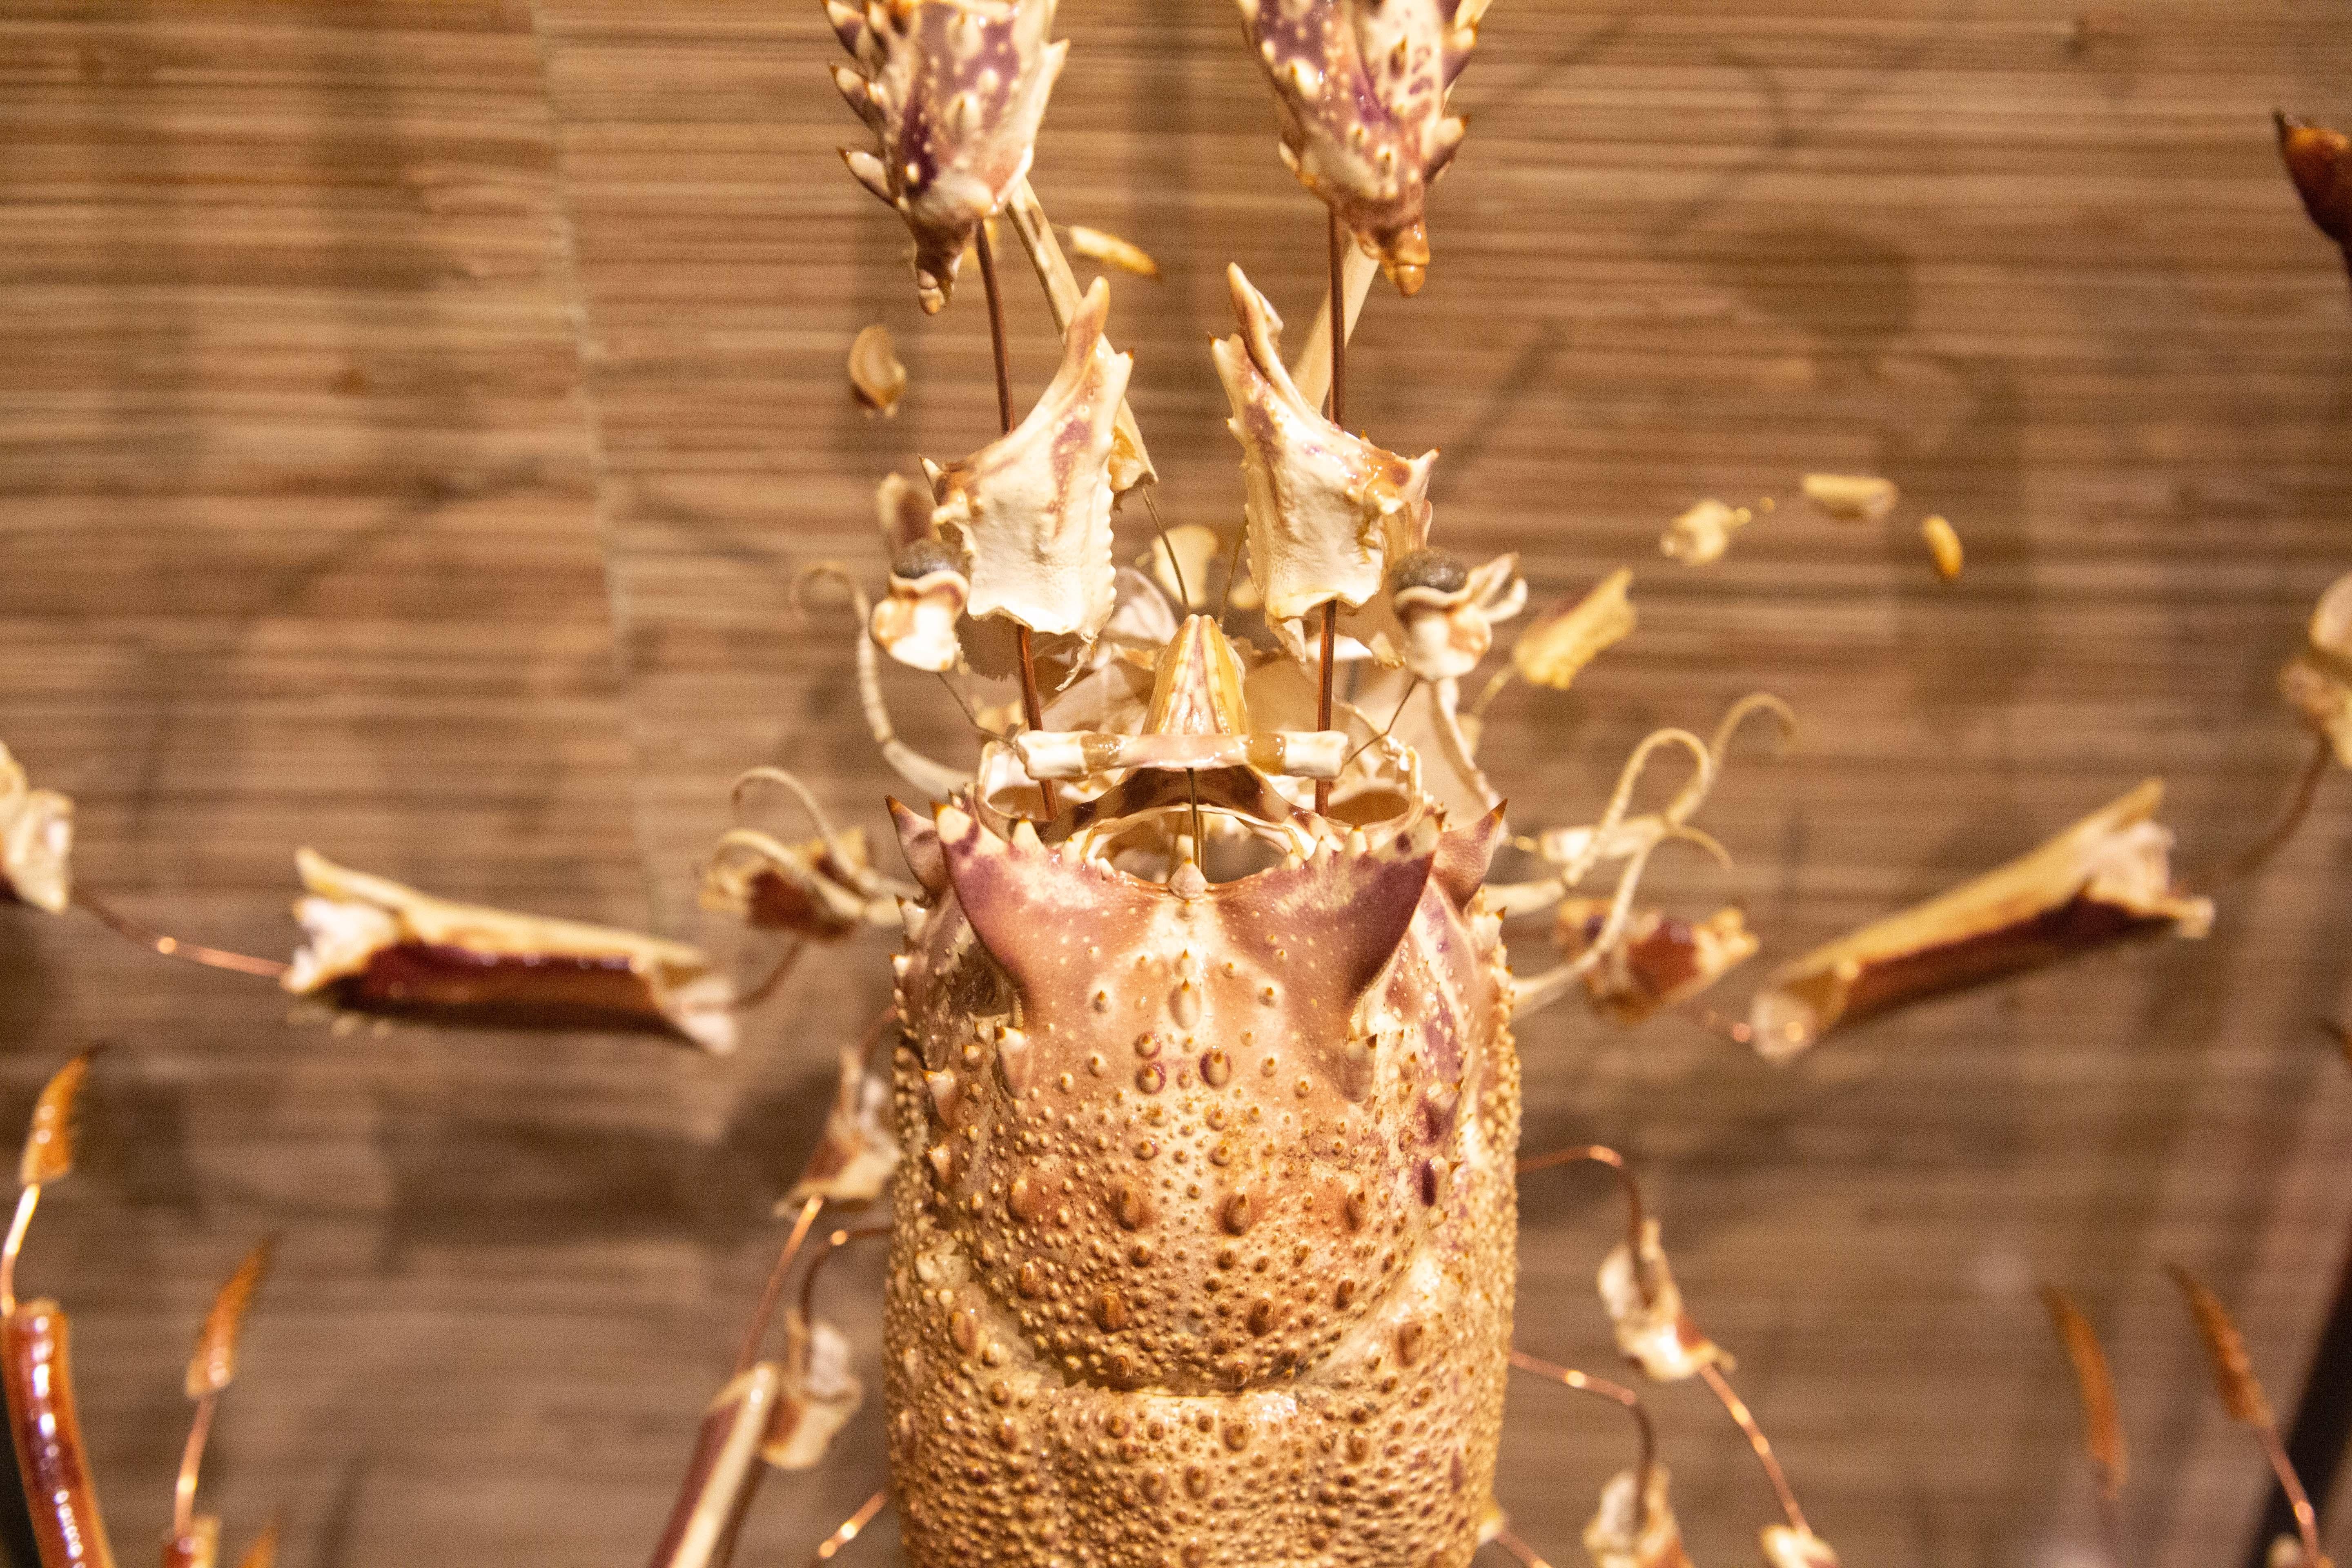 Napoleon III Large French Deconstructed Clawed Lobster Sculpture in a Glass and Brass Case